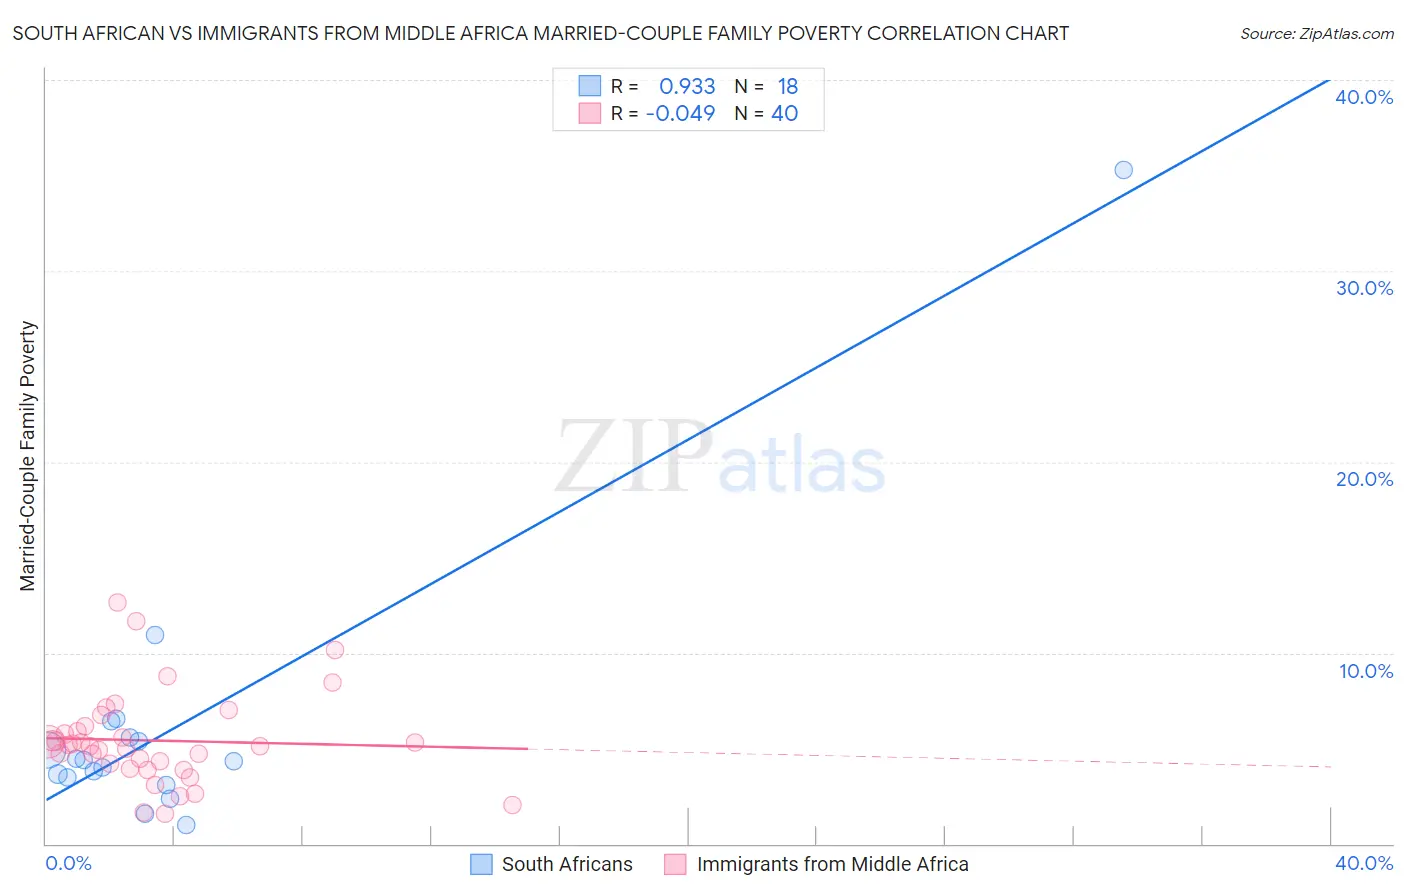 South African vs Immigrants from Middle Africa Married-Couple Family Poverty